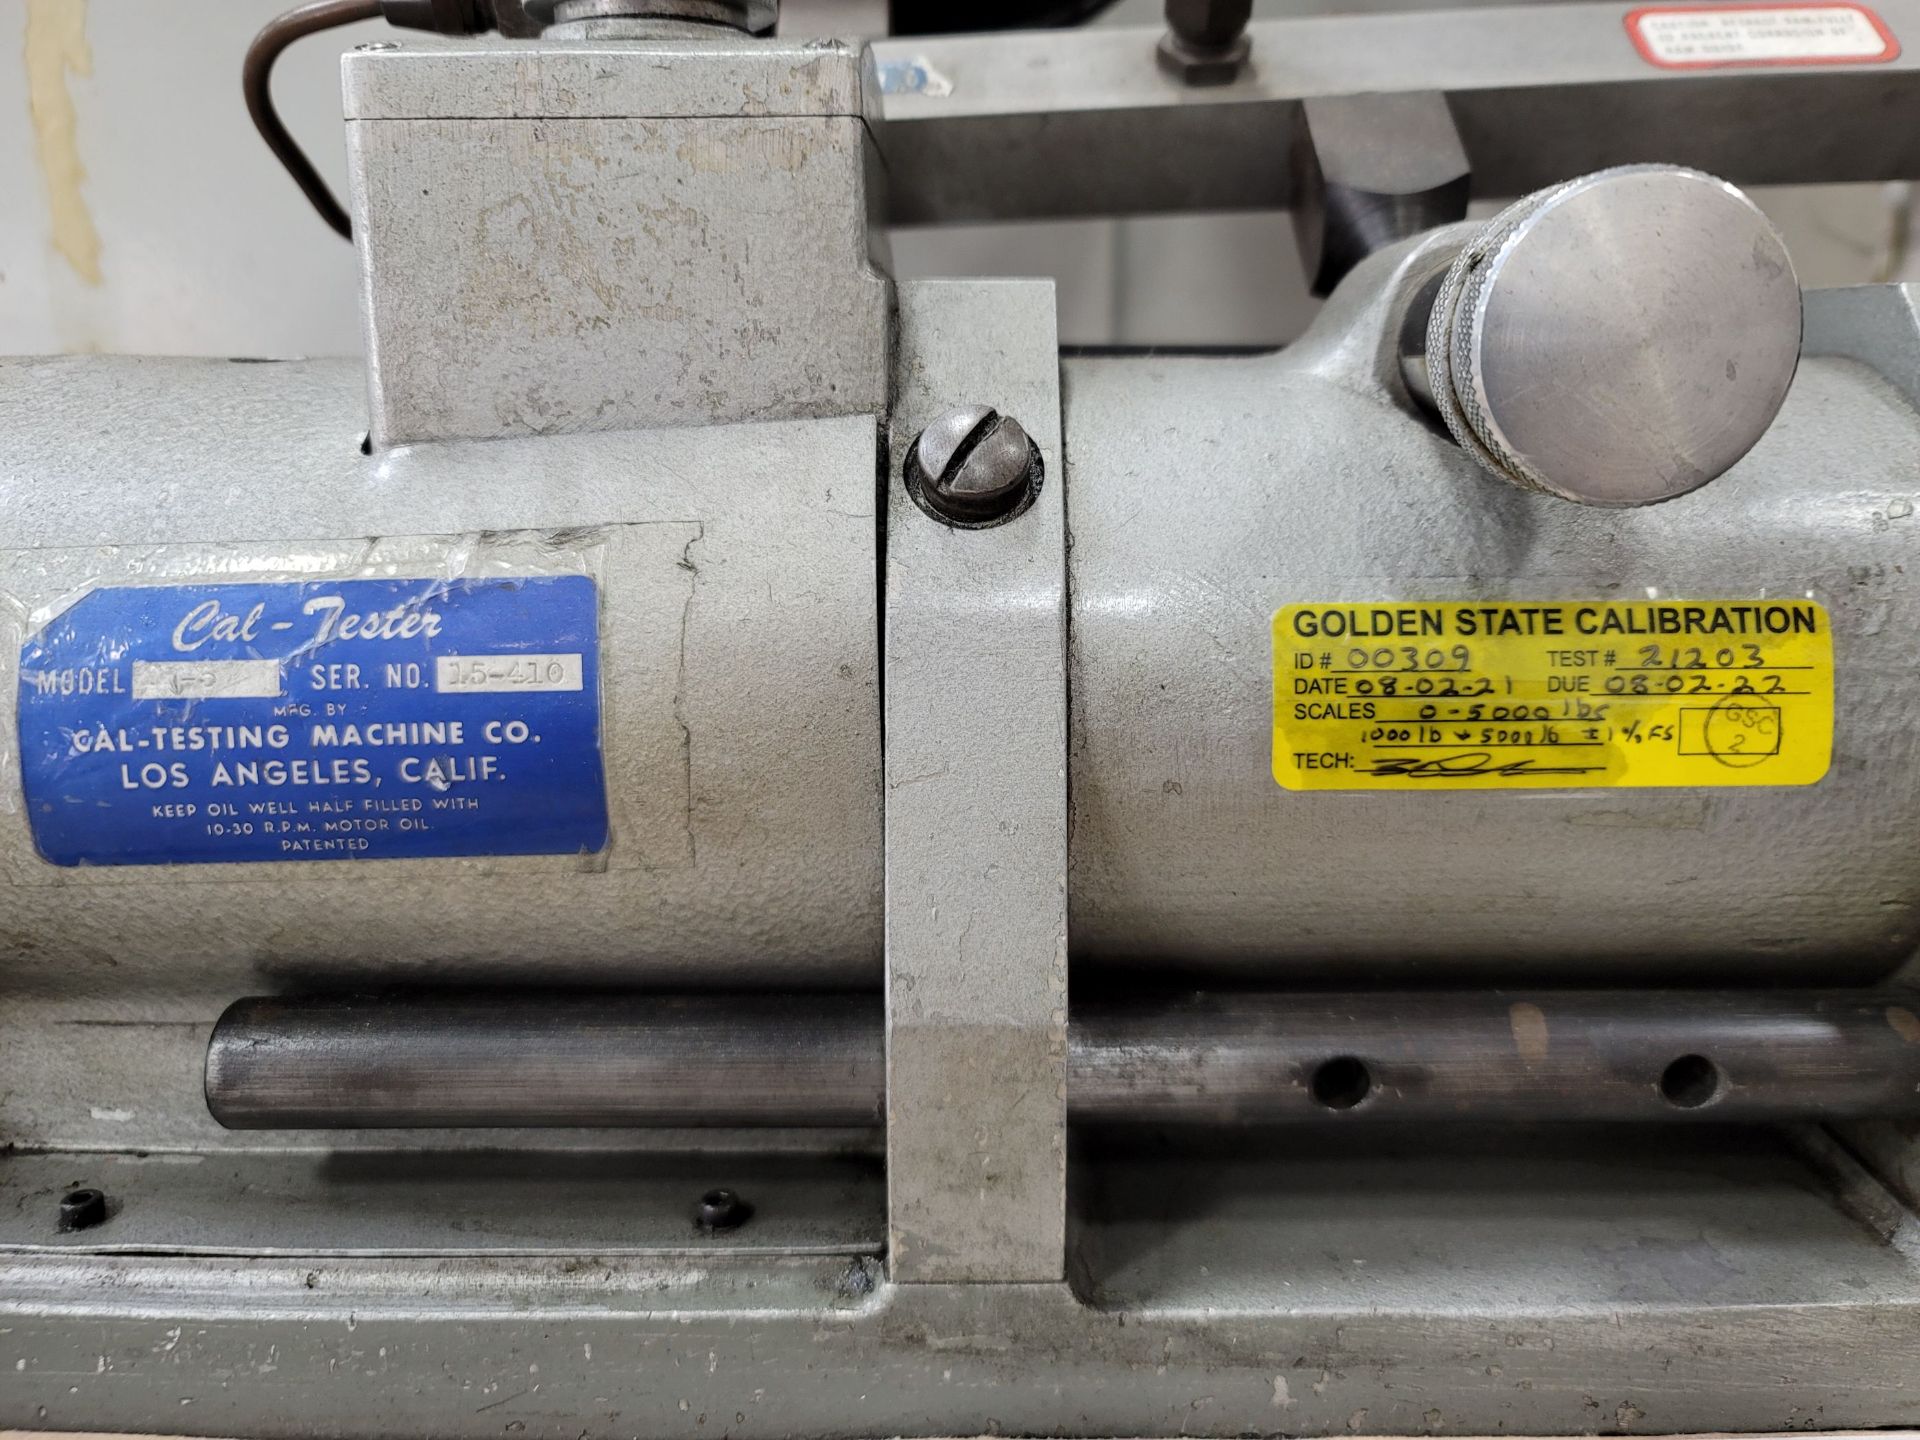 CAL-TESTER WELD TESTER, S/N 15-410 - Image 2 of 2